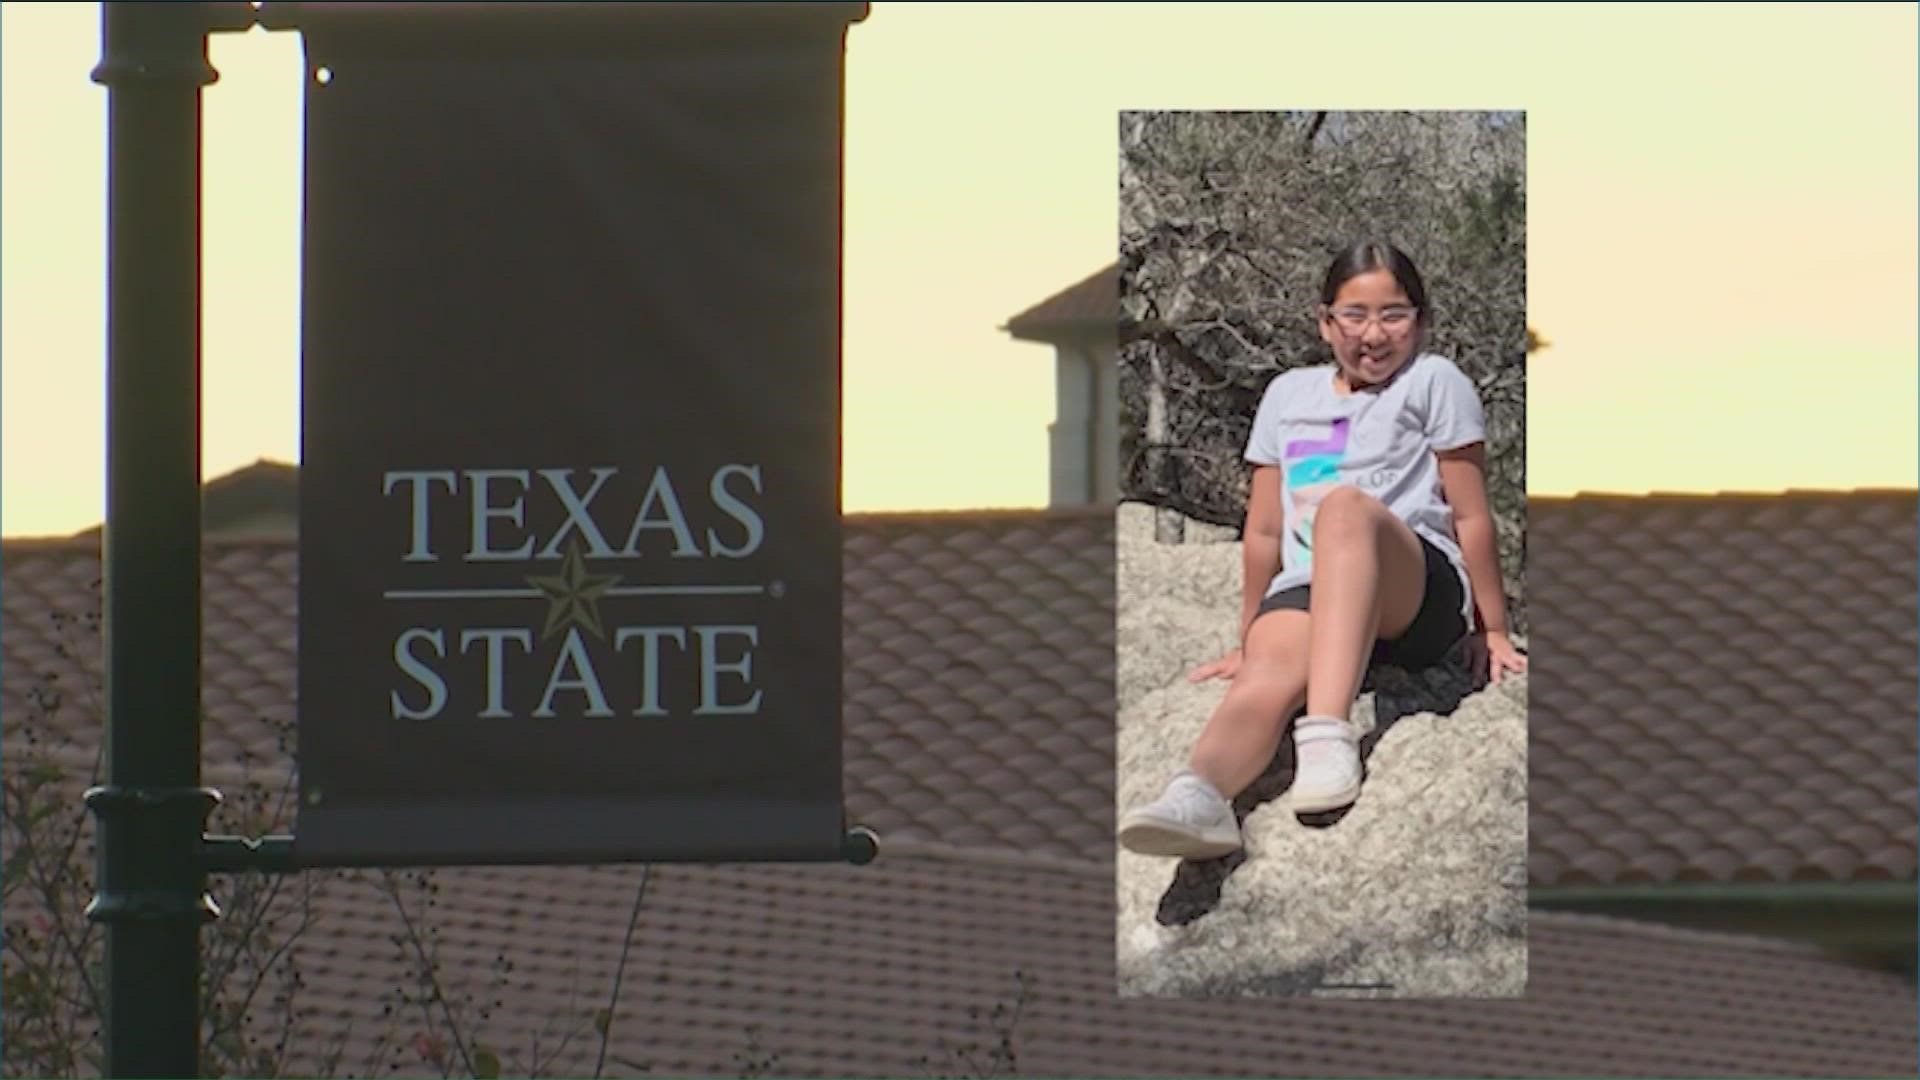 Texas State University is honoring the life of a student who died at Robb Elementary School in Uvalde.